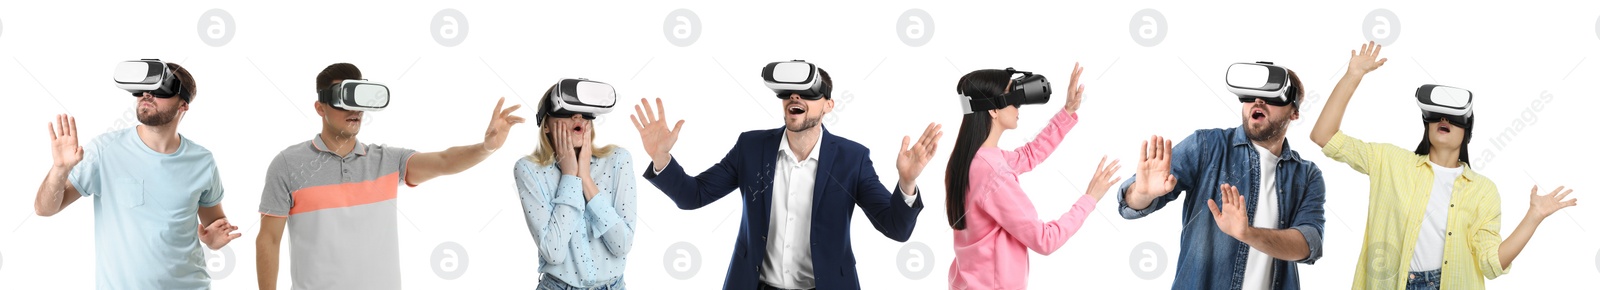 Image of People using virtual reality headset on white background, collage. Banner design